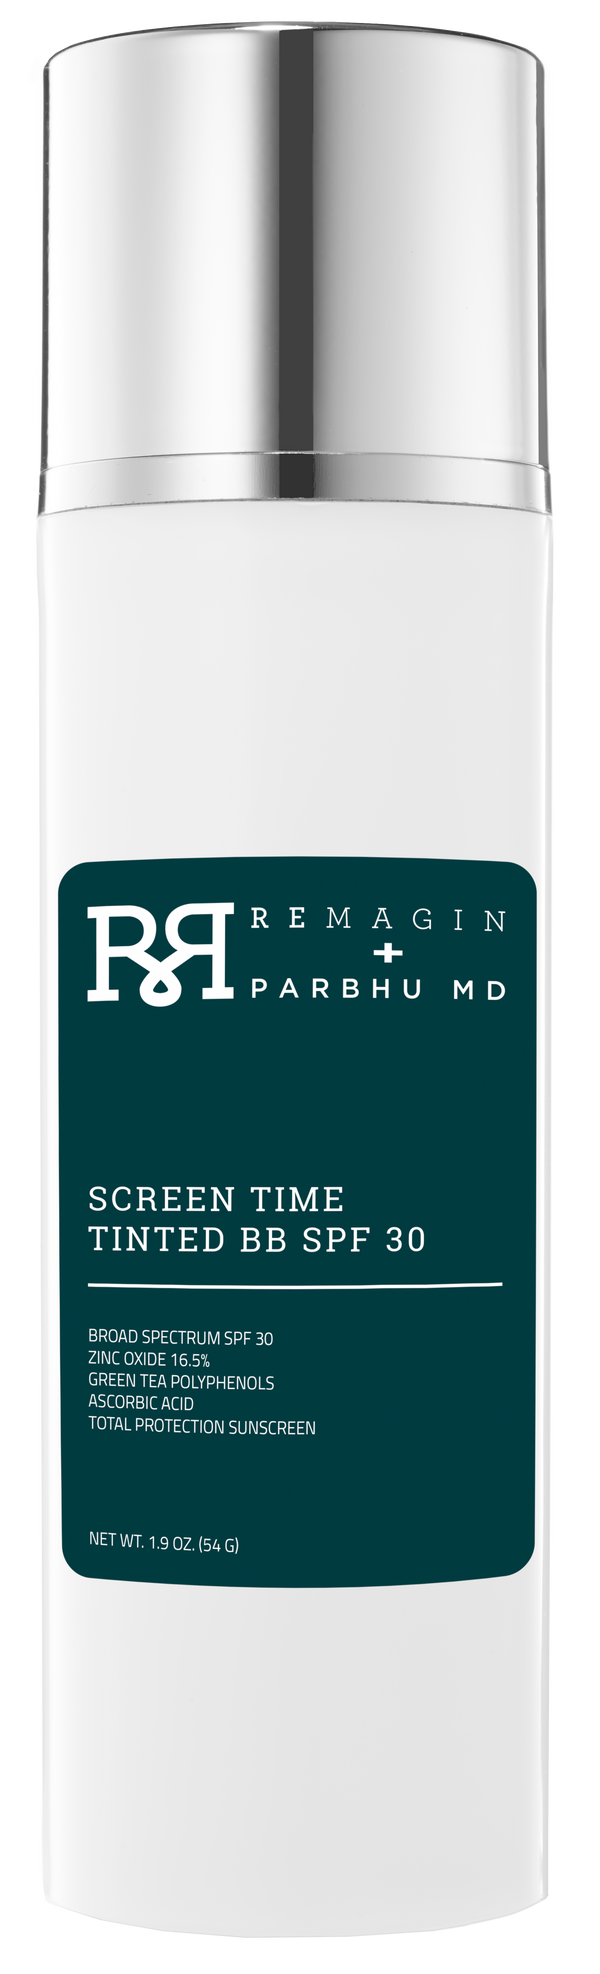 SCREEN TIME TINTED BB SPF 30